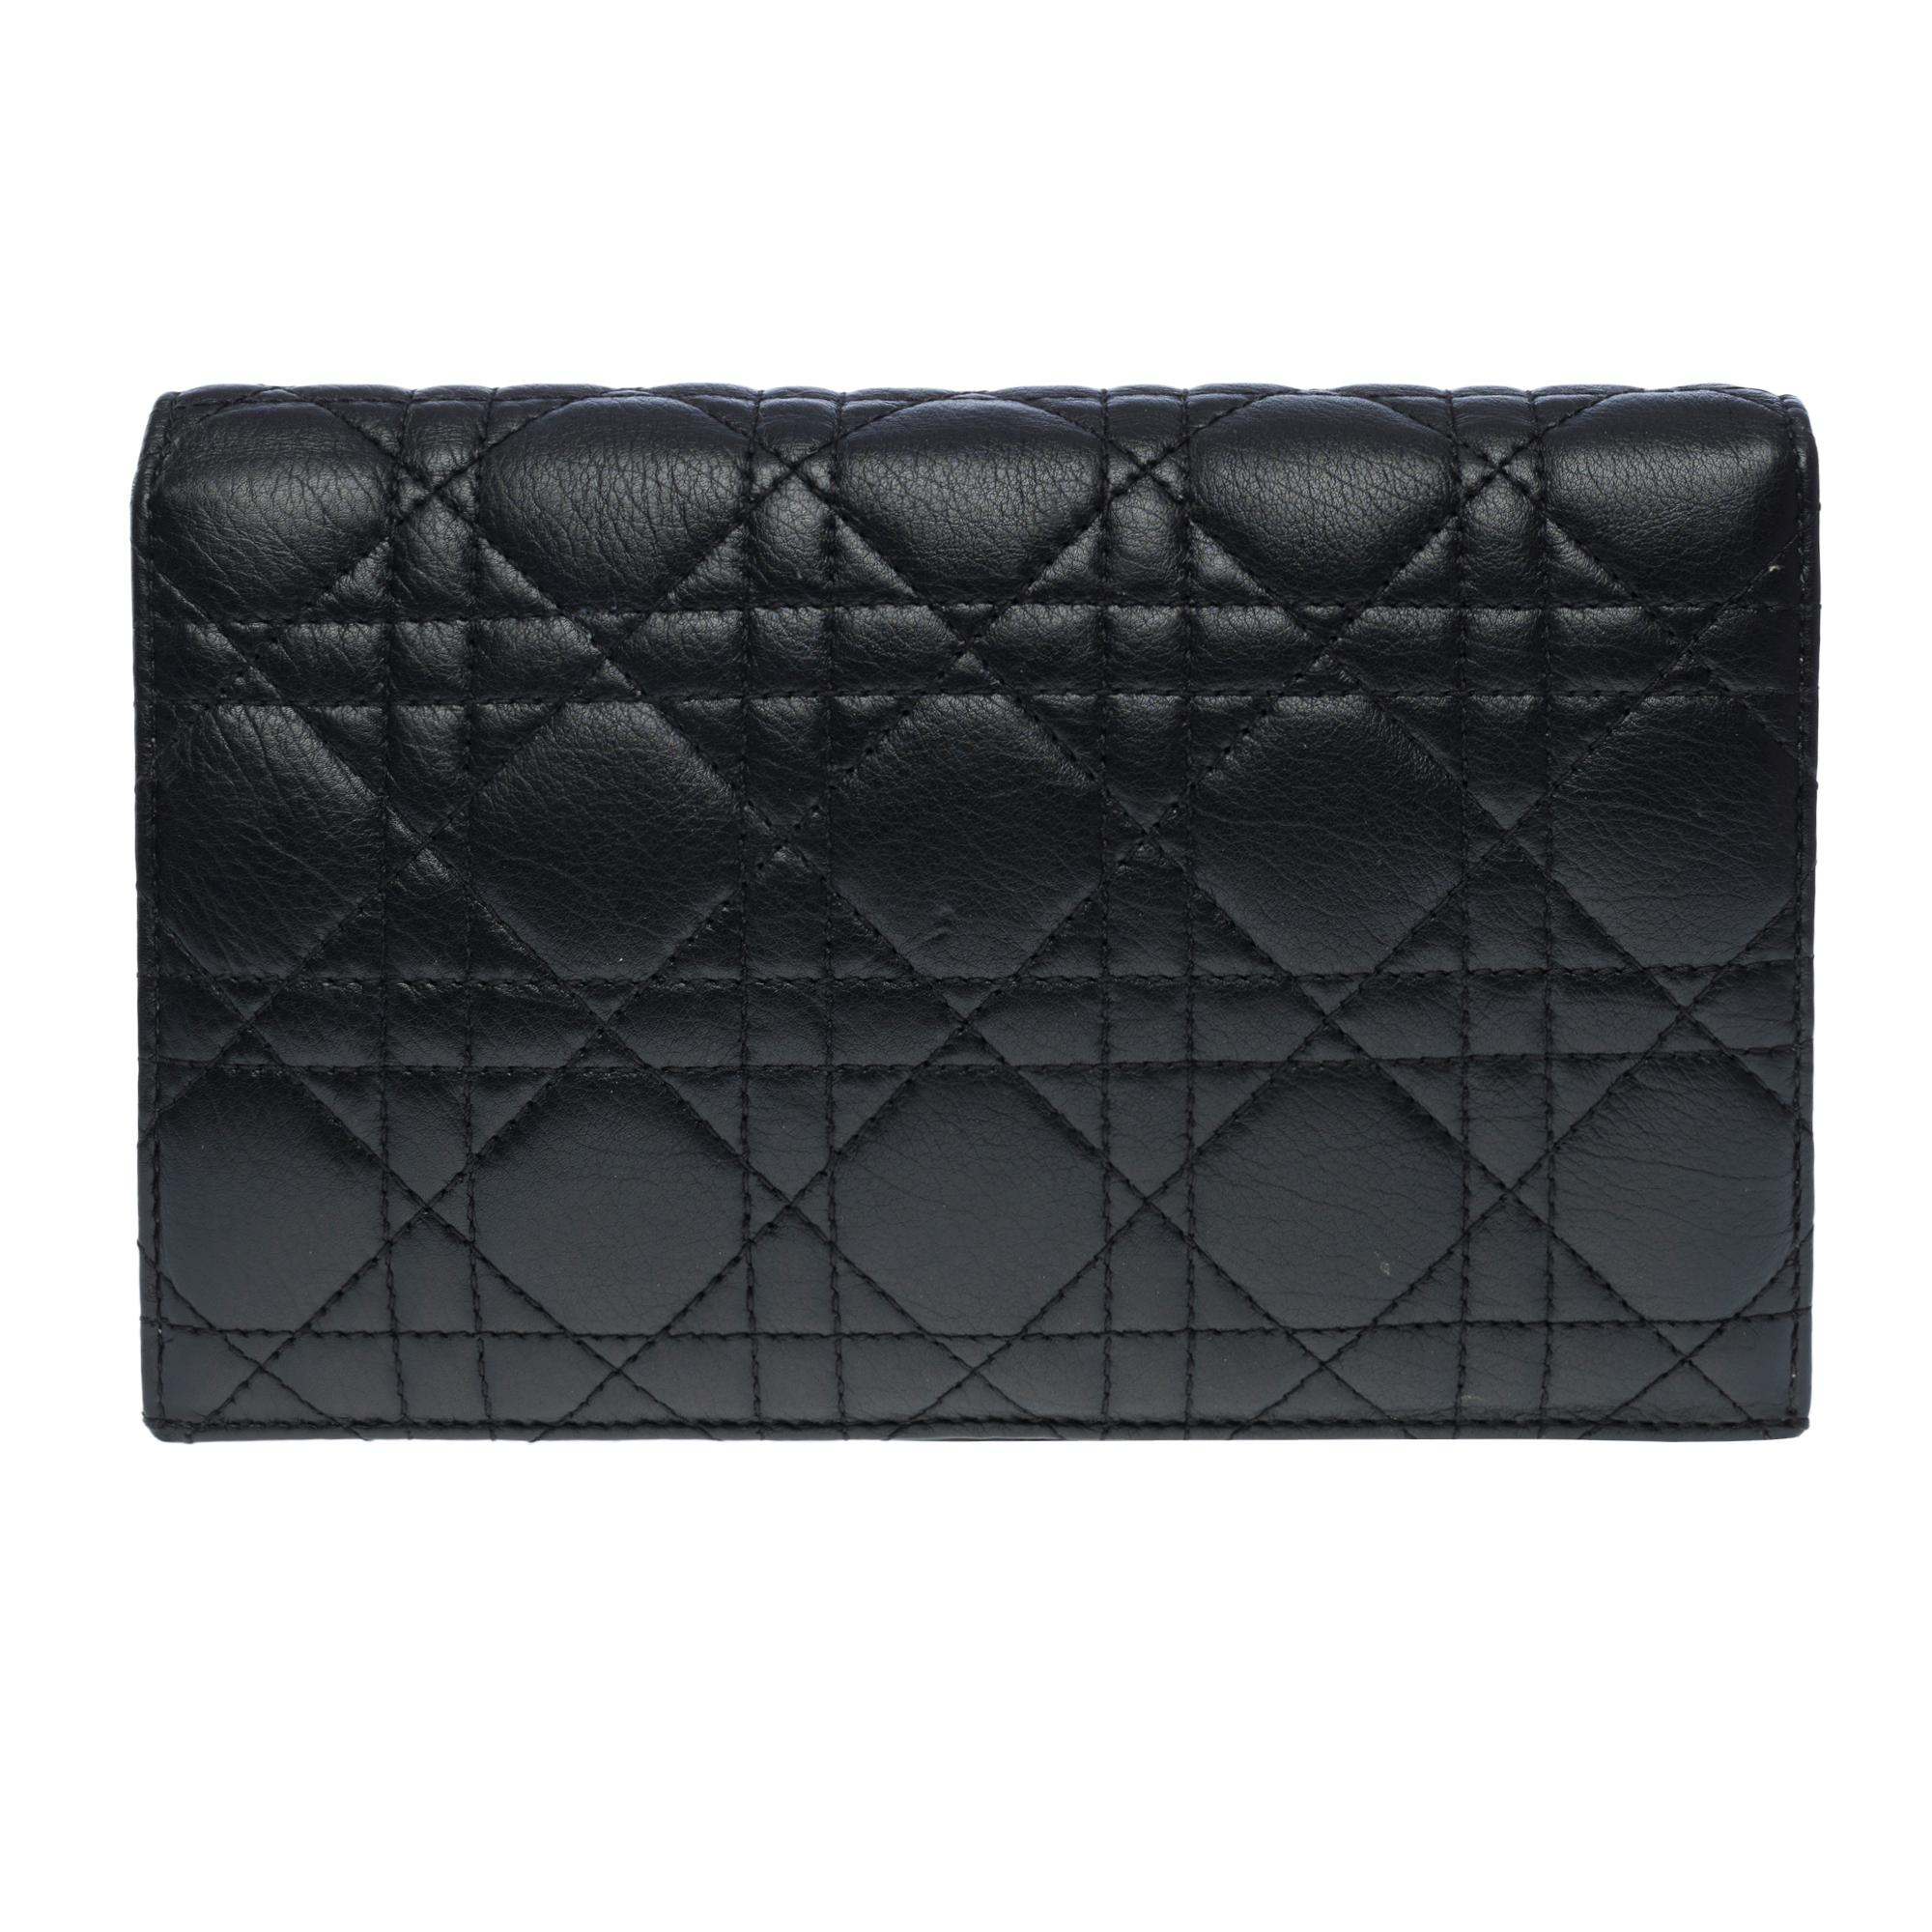 Christian Dior Caro long Wallet in black cannage leather, GHW In Good Condition For Sale In Paris, IDF